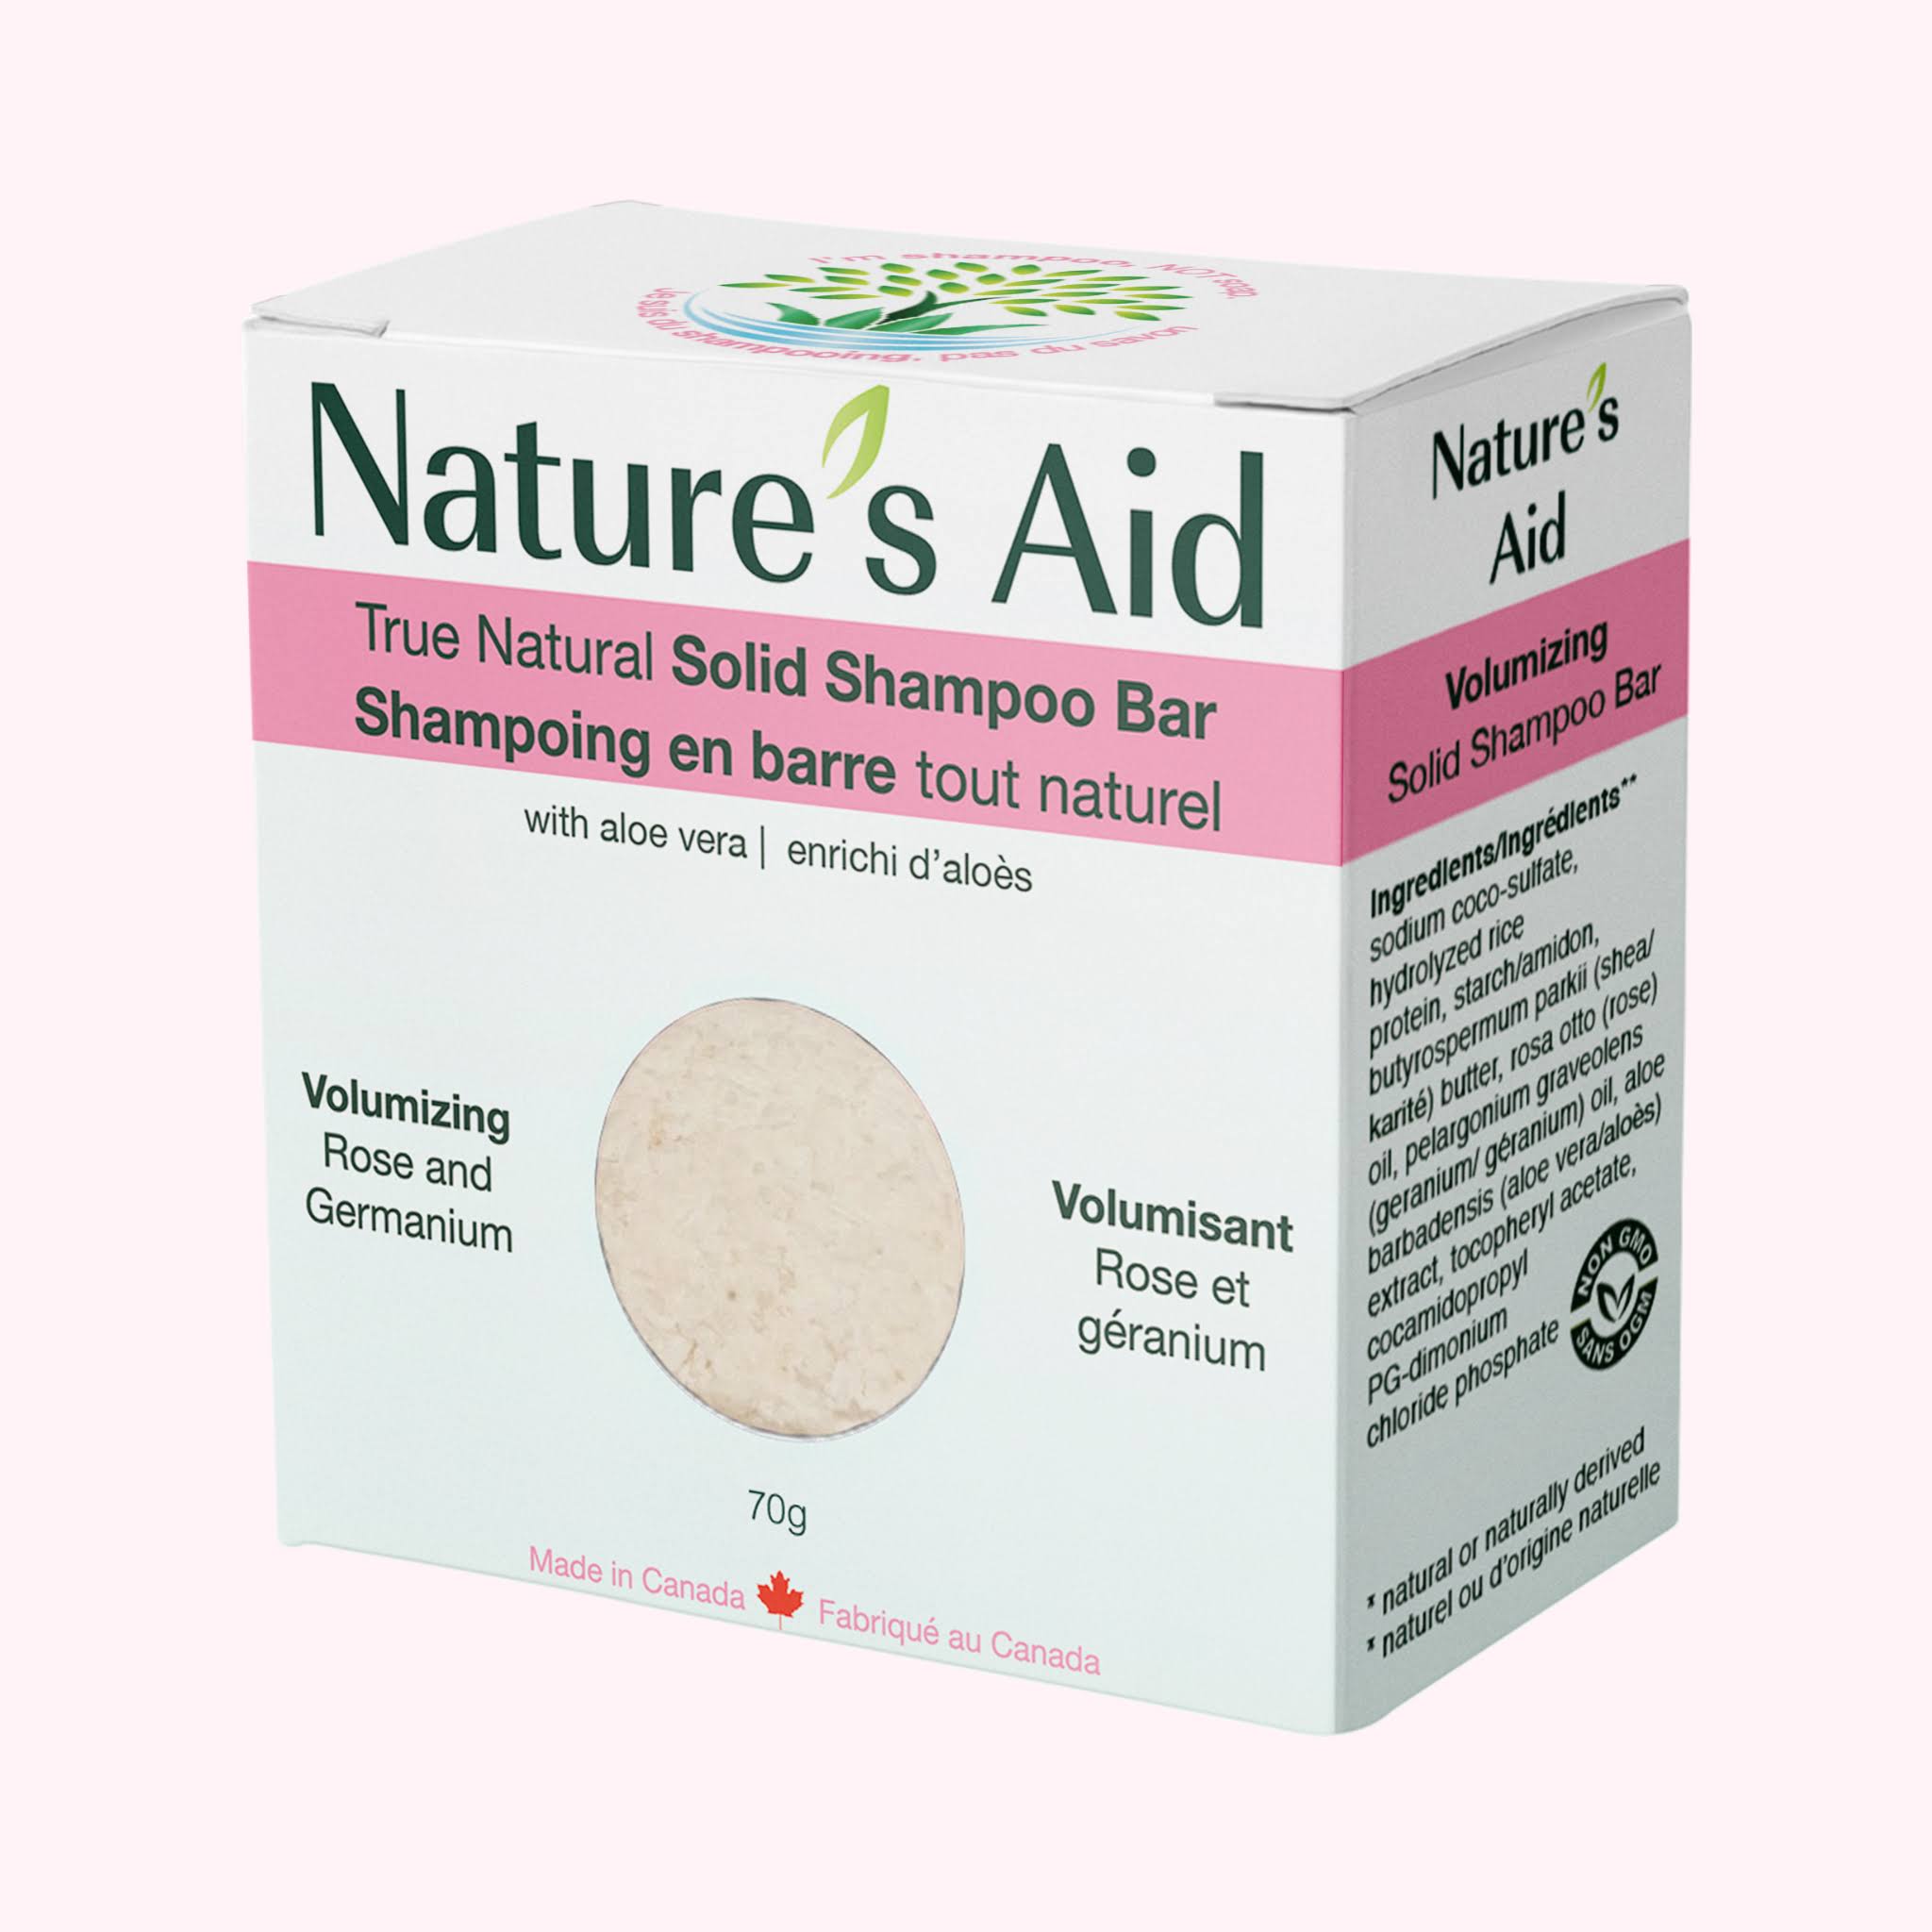 True Natural Solid Shampoo Bars (Moisturizing with Mango Butter & Tang